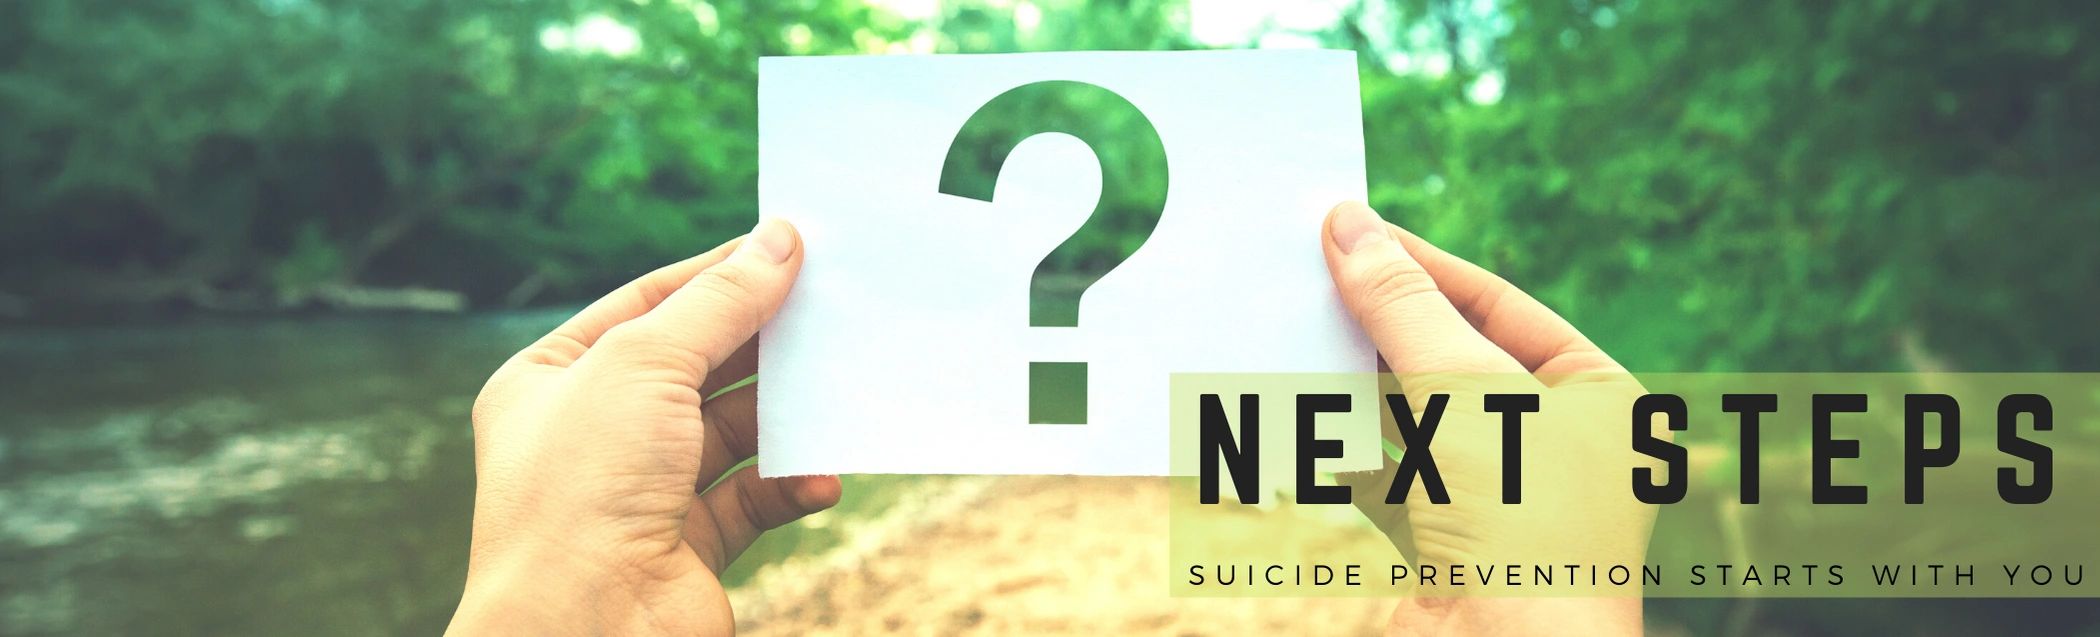 Next Steps suicide prevention to stop one